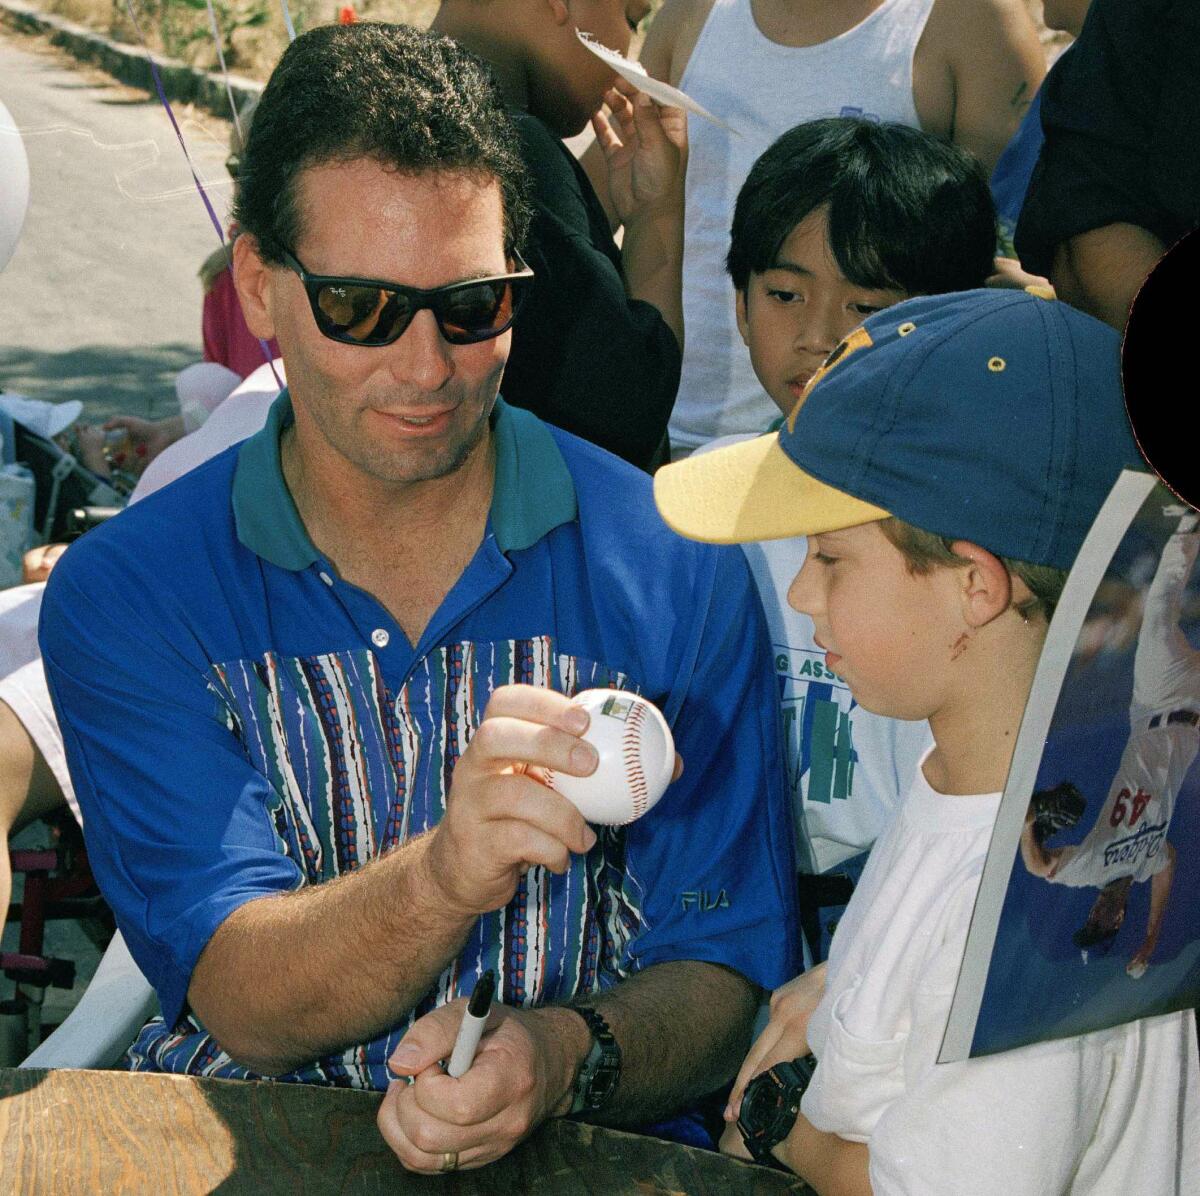 Dodgers pitcher Tom Candiotti shows a young fan a "knuckle hold" during an event.